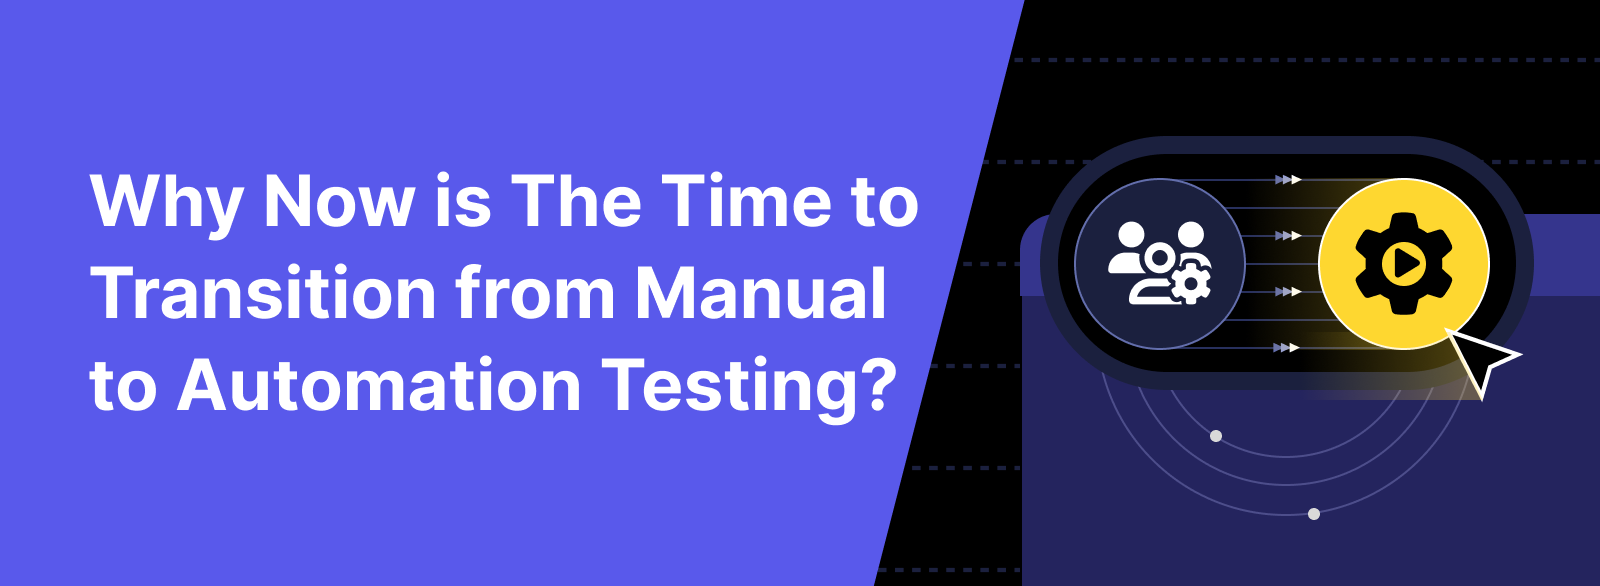 Why is now the time to transition from Manual To Automation Testing?